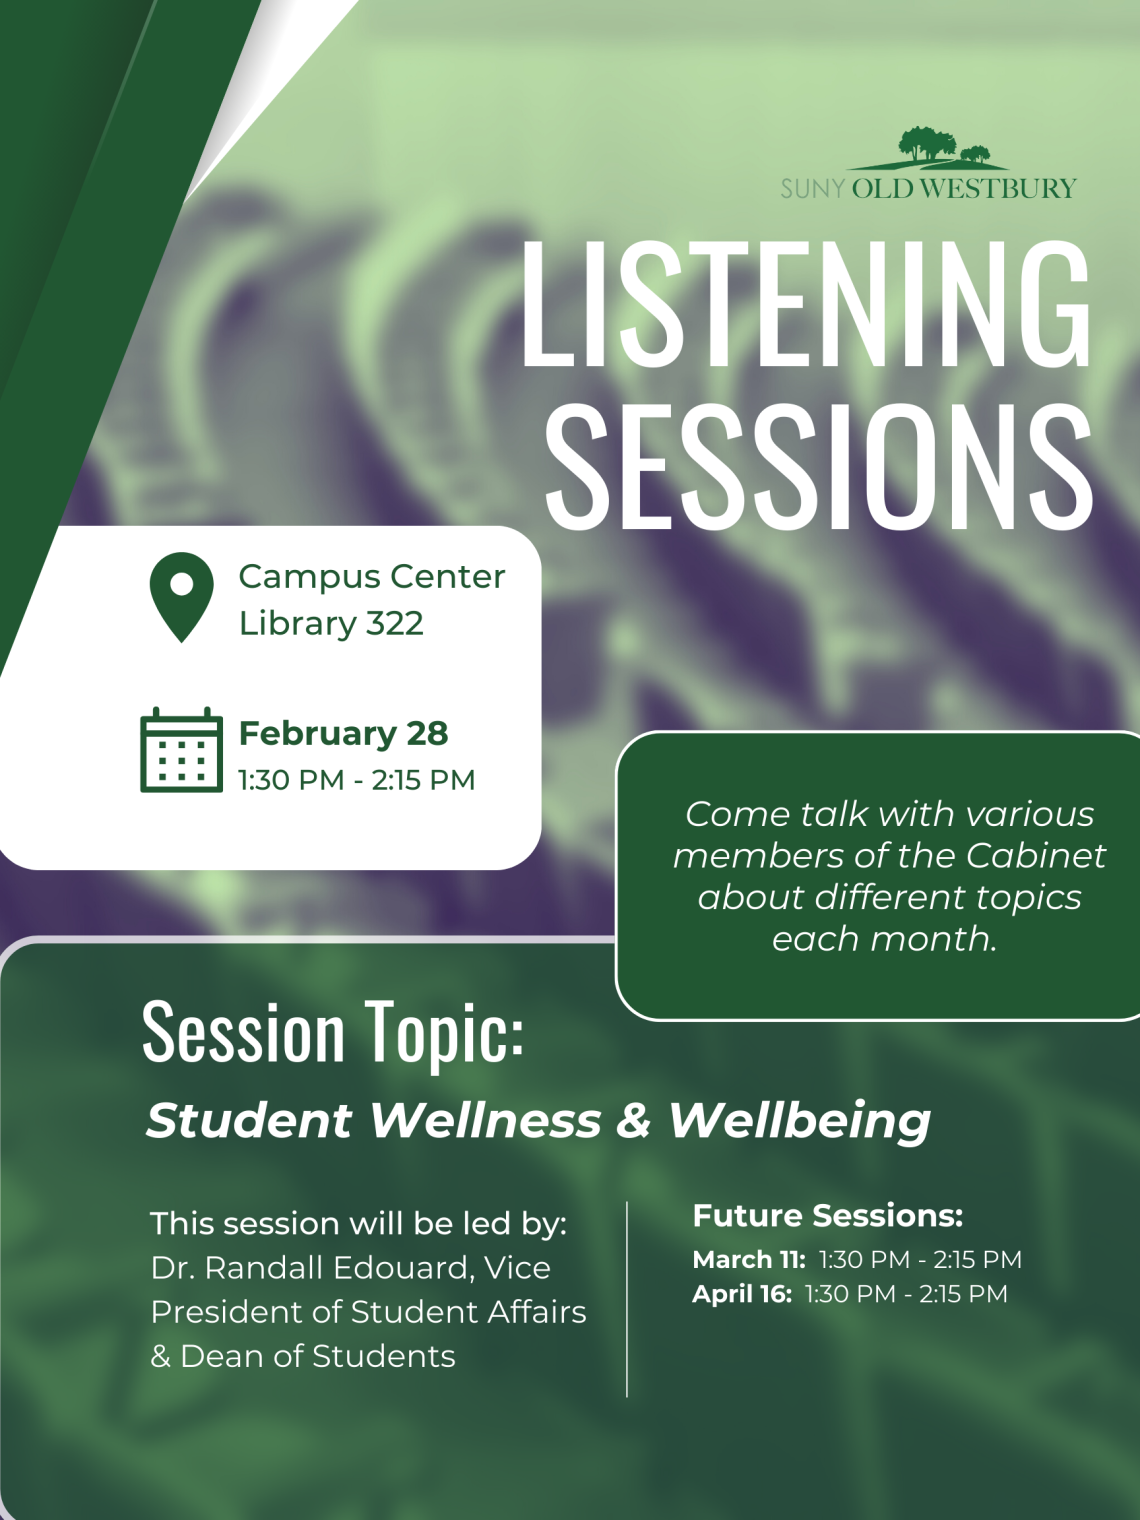 Campus Center Library 322 at 1:30 PM. Dr. Randall Edouard will host this session, and the topic will be Student Wellness & Wellbeing.